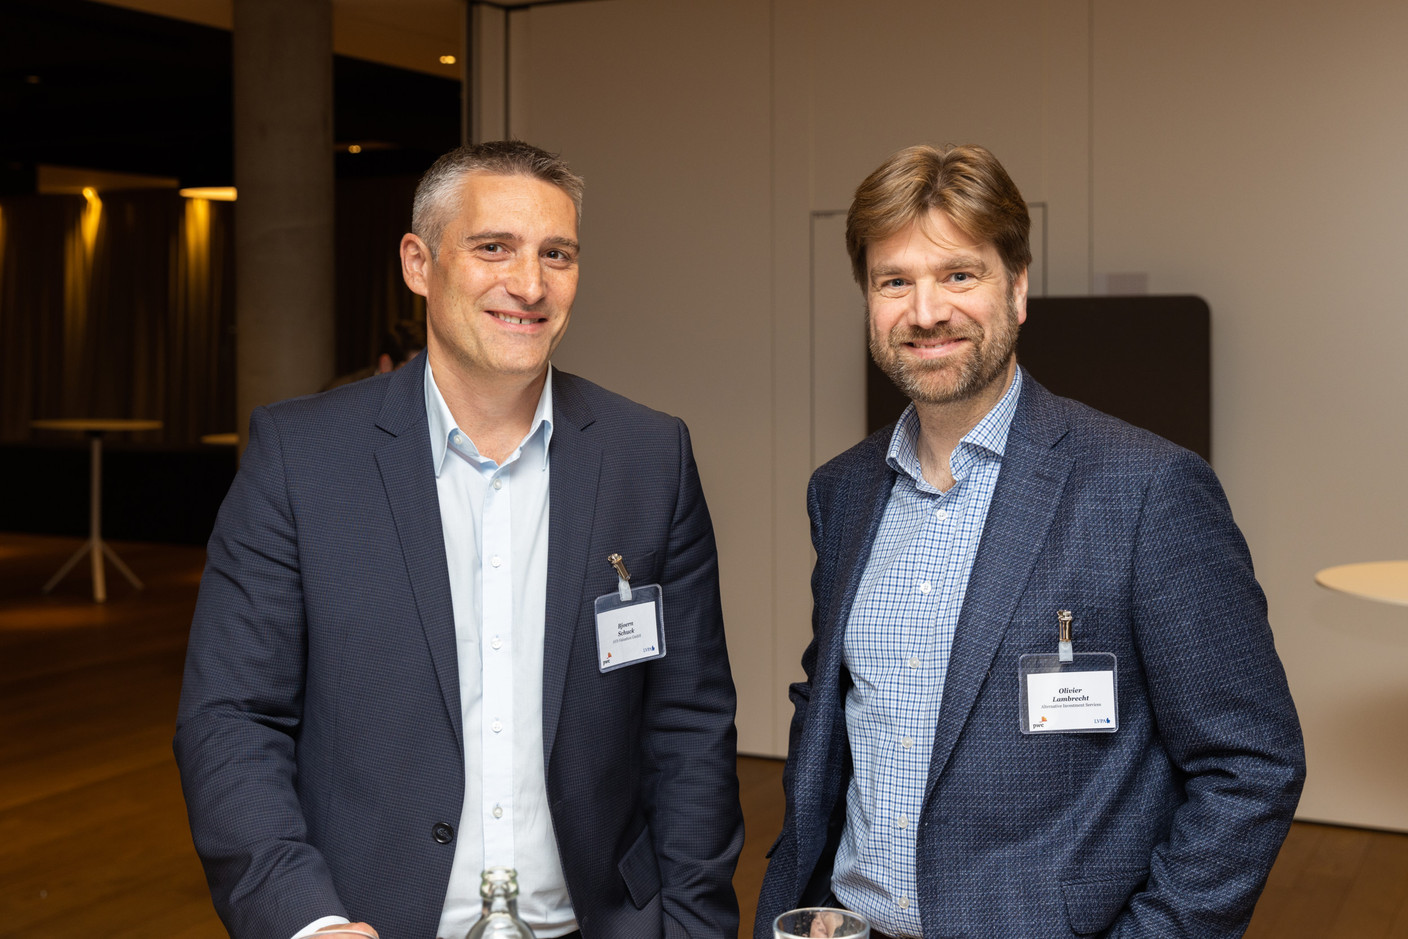 Bjoern Schuck and Olivier Lambrecht at the LVPA launch event. Romain Gamba